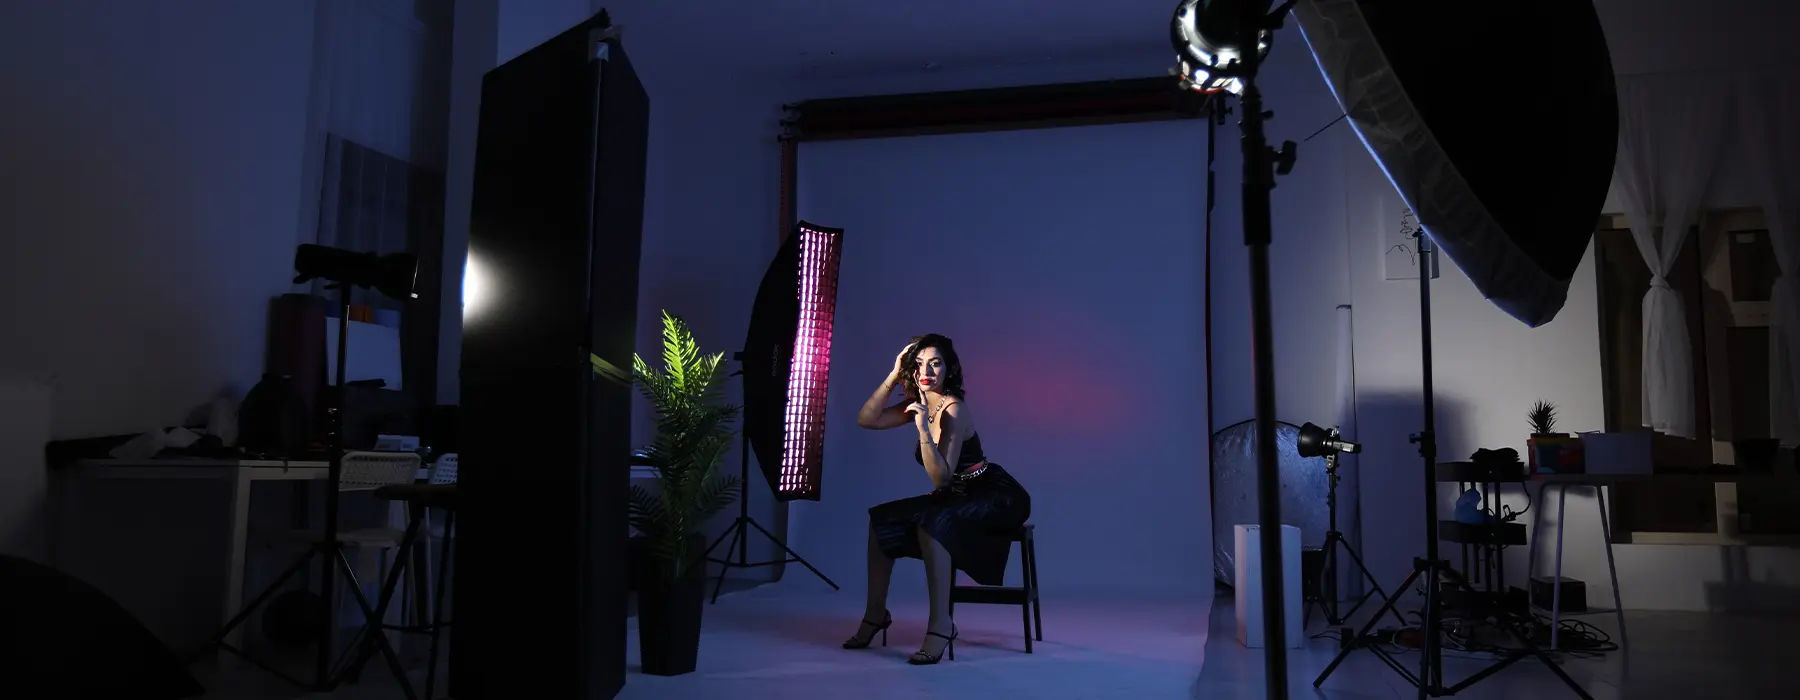 Lighting in Fashion Photography using Optical Snoot